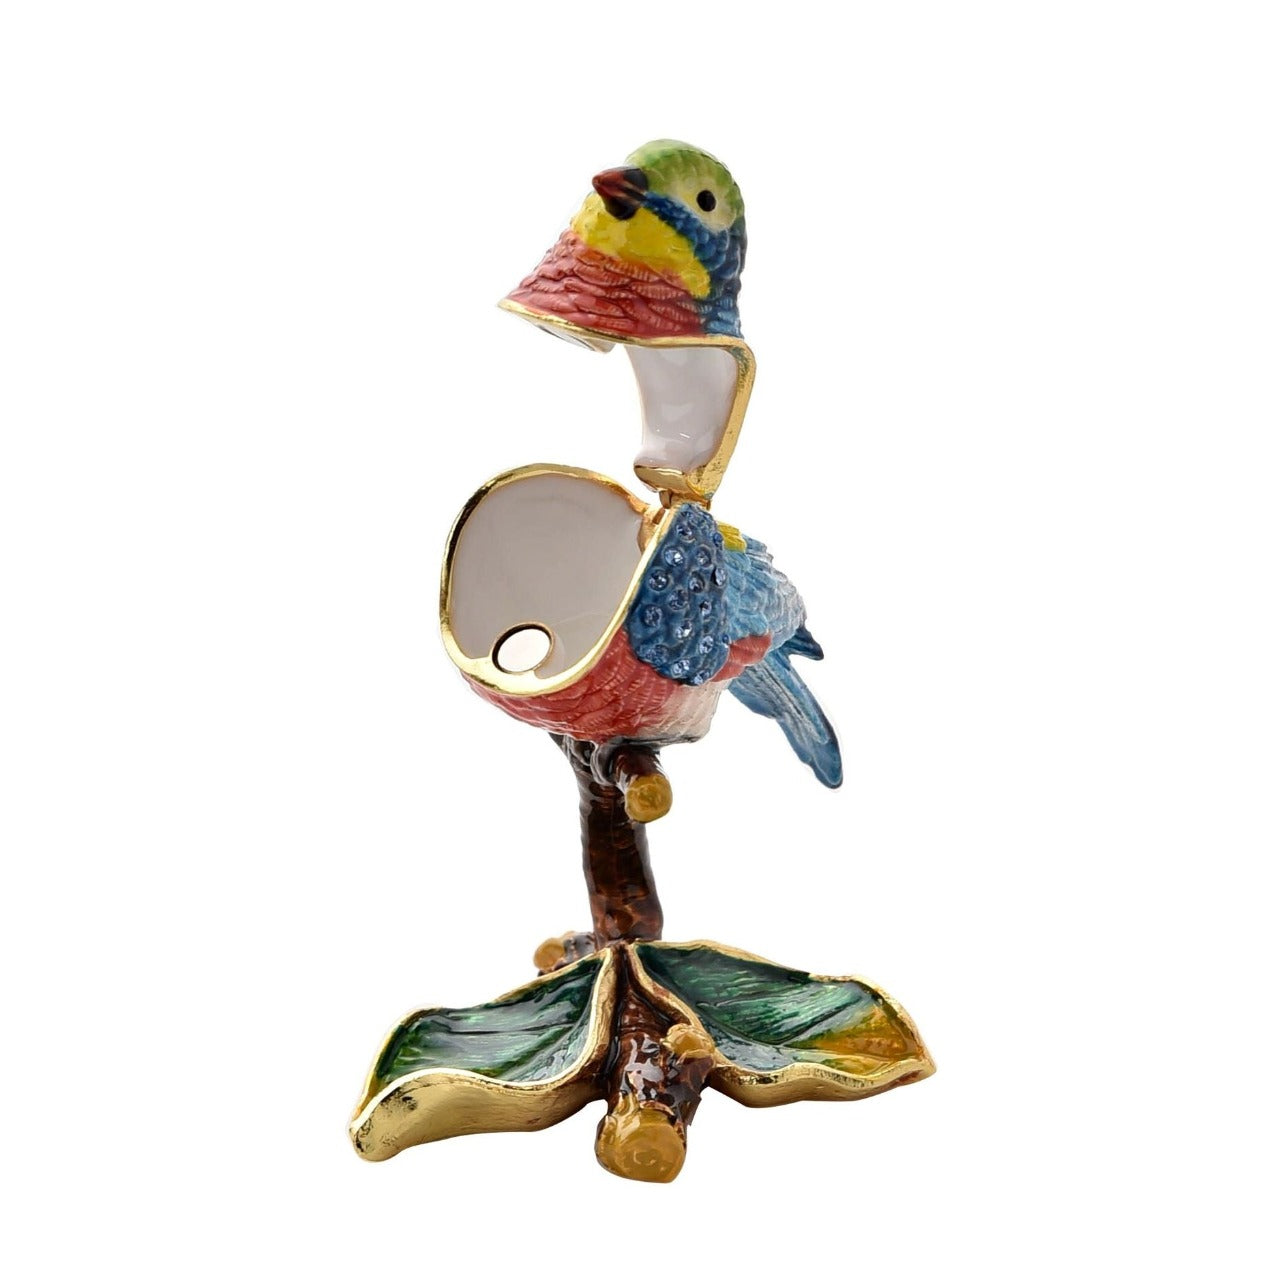 Treasured Trinkets - Blue and Red Bird on Branch  A bird on branch trinket box from Treasured Trinkets by STRATTON®.  The eye-catching trinket box makes a true statement piece for any bedroom with its colourful bird sitting upon a branch.